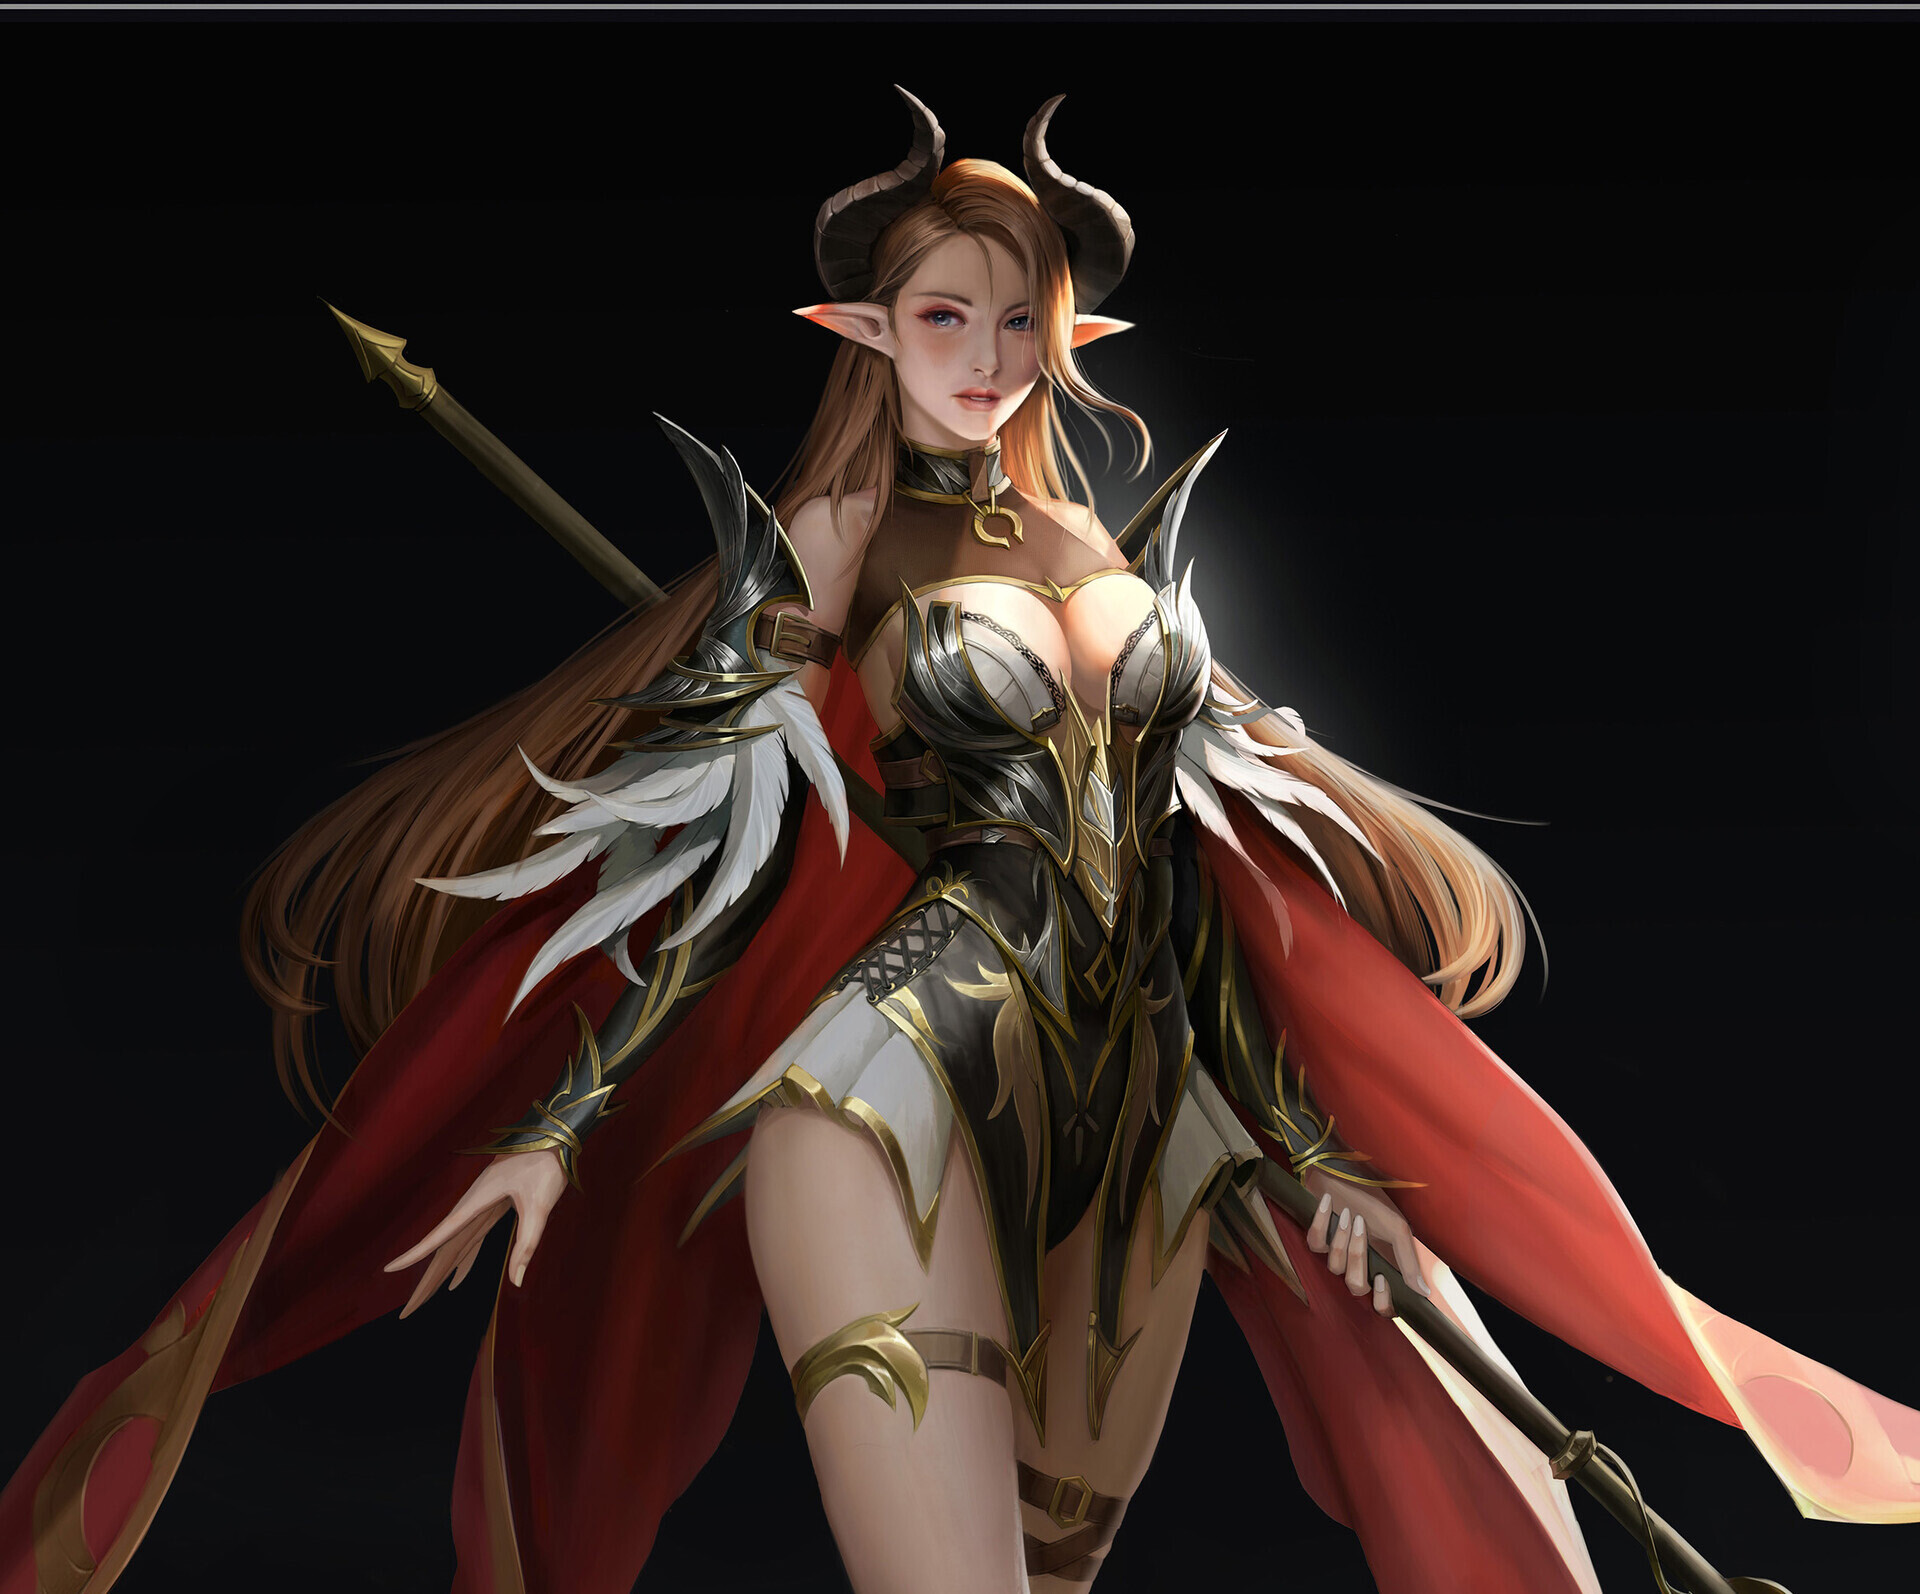 General 1920x1594 Zhuang Yue Dong drawing women brunette weapon fantasy art simple background red clothing pointy ears cleavage